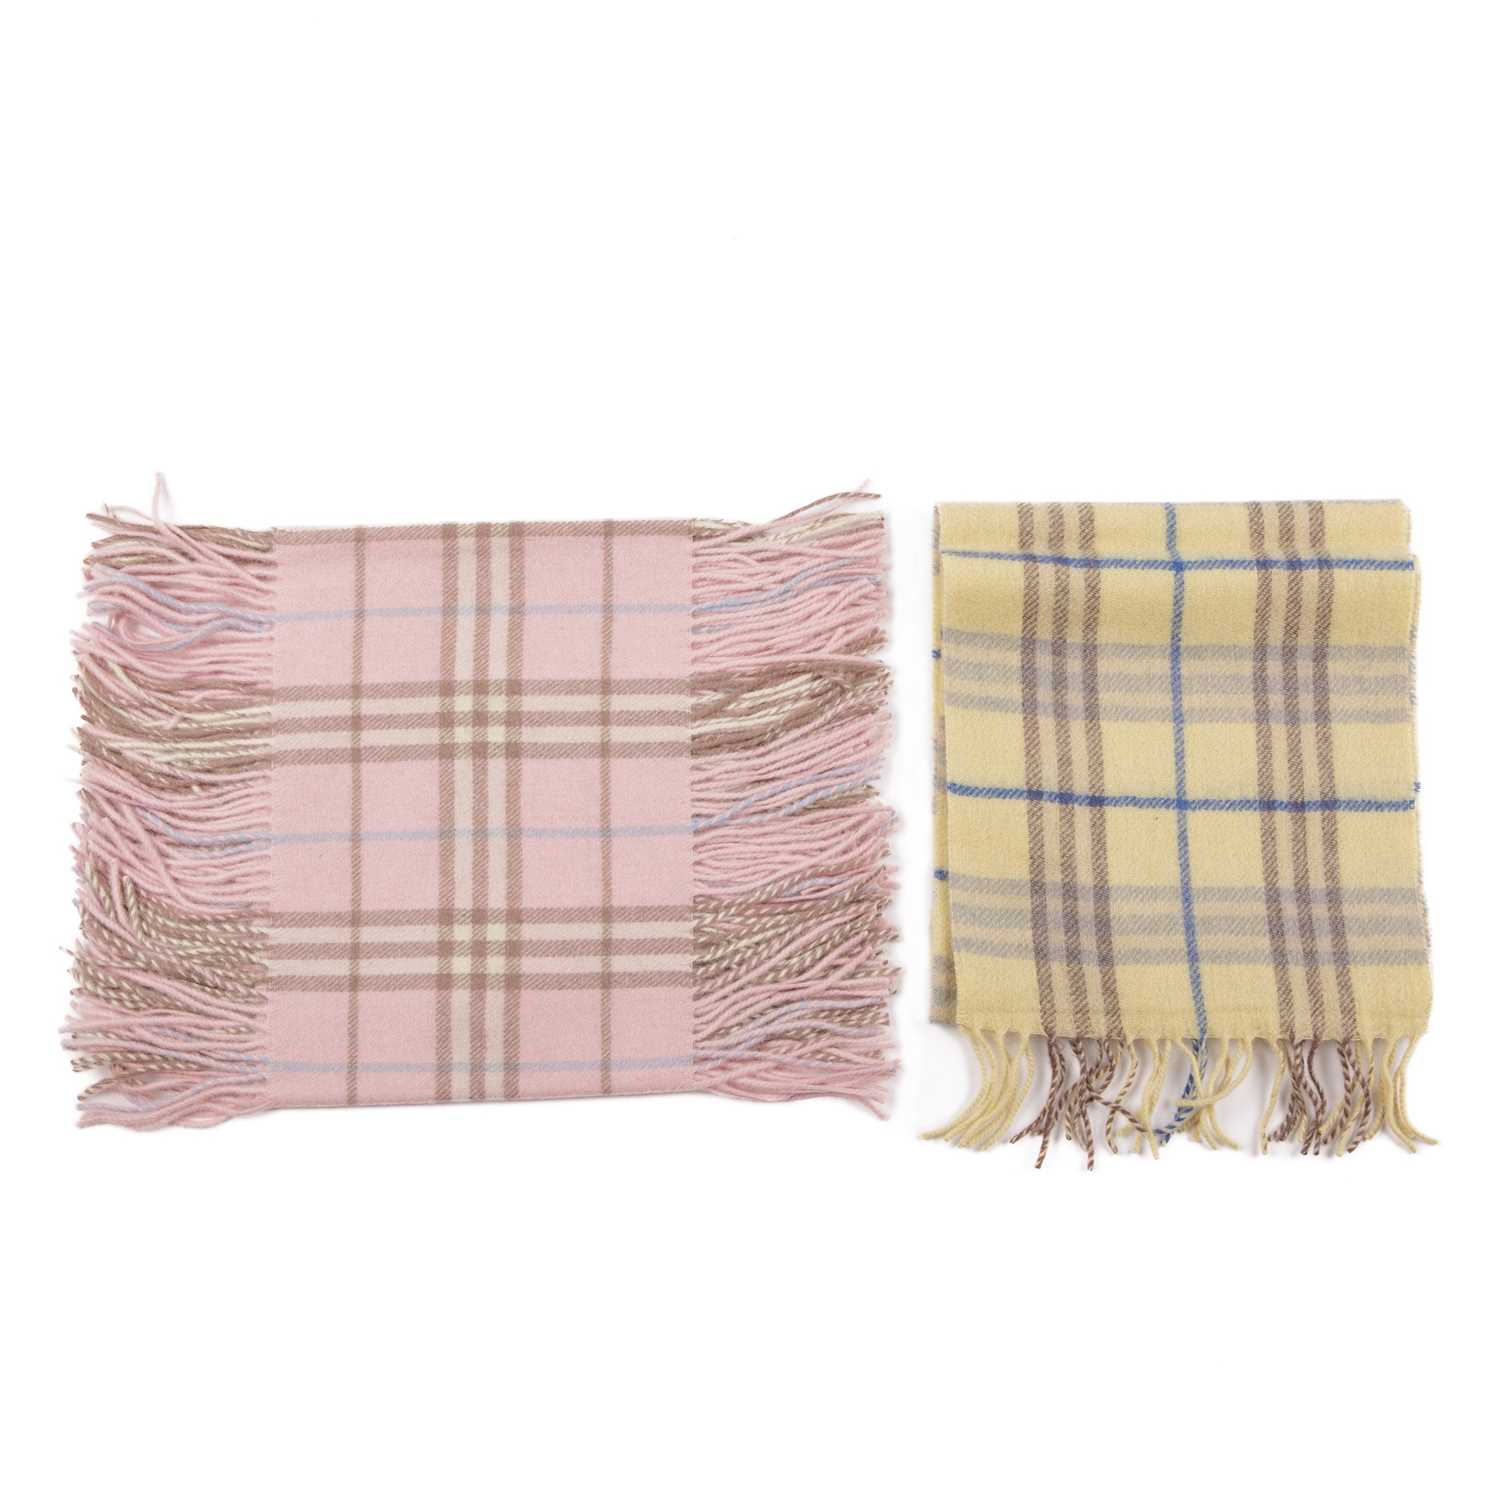 Burberry, two Nova Check lambswool scarves, to include a pale yellow scarf with fringe detailing